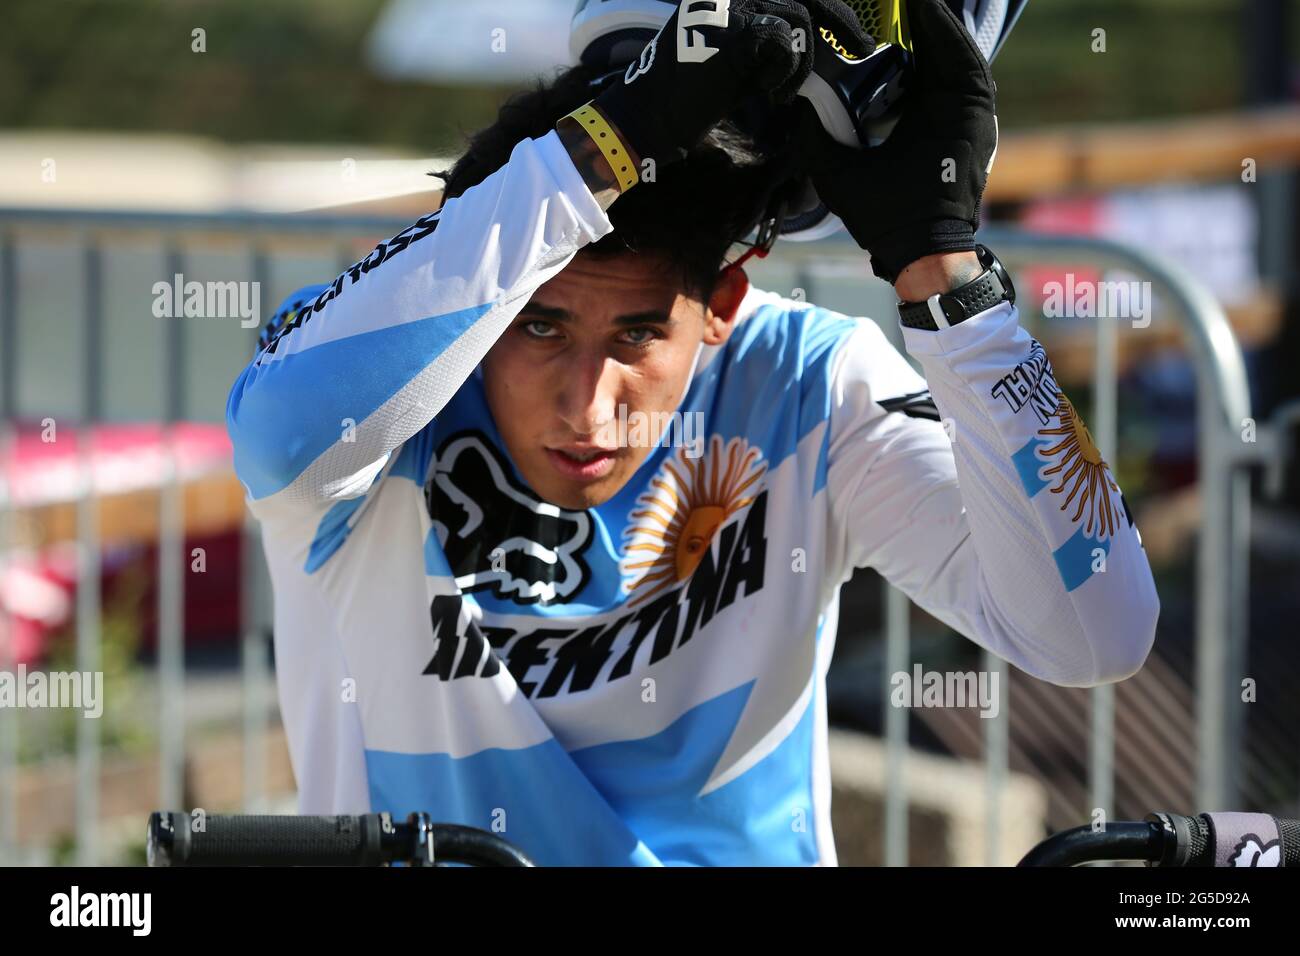 Nicolas TORRES of Argentina (143) finishes third in the final of the Men Elite UCI BMX Supercross World Cup Round 1 at the BMX Olympic Arena on May 8t Stock Photo